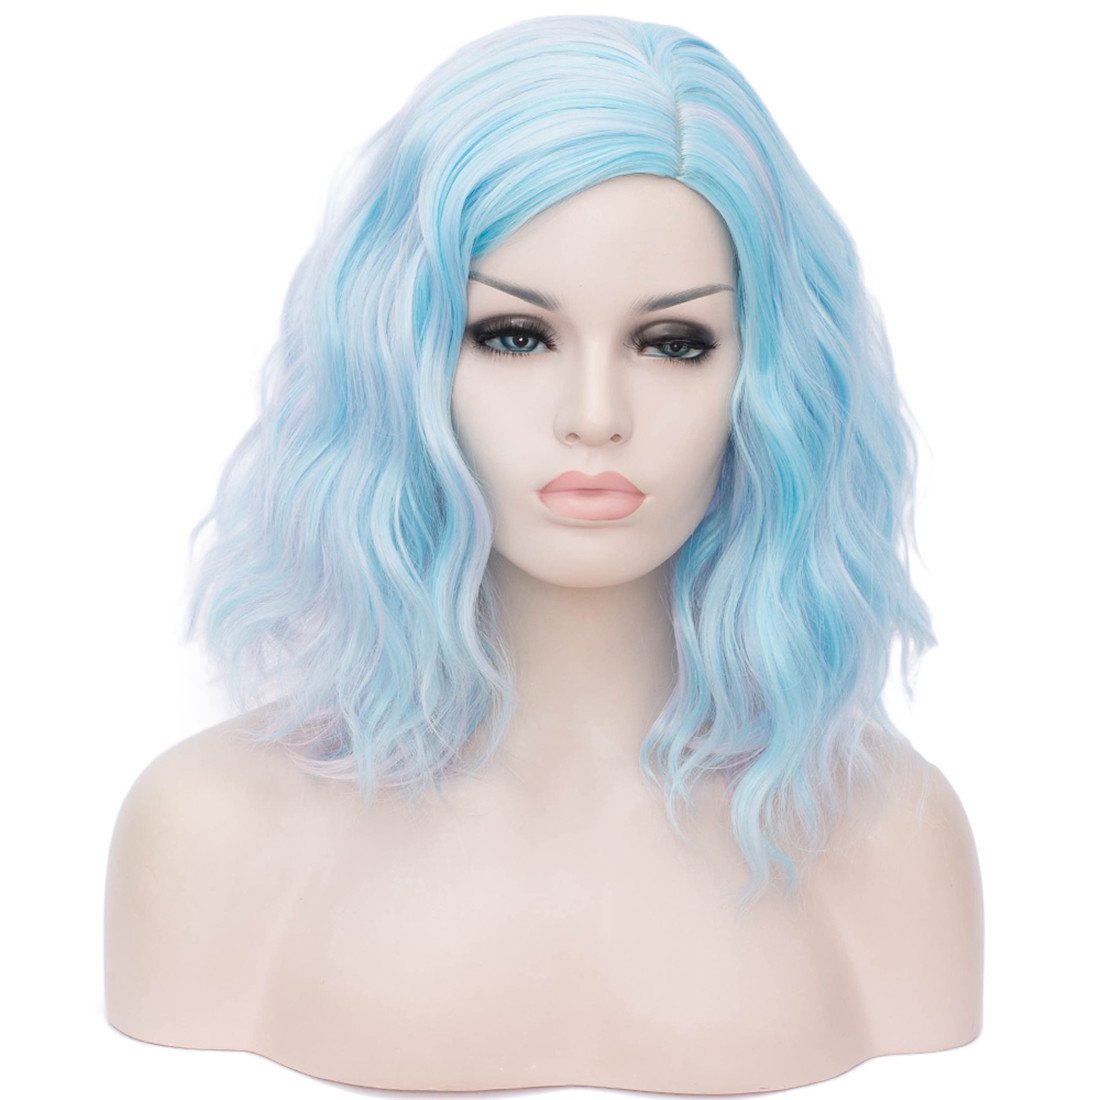 bluewig cosplay wigs full wigs HAIR Synthetic Curly Bob Wig with Bangs Short Bob Wavy Hair Wigs Wine Red Color Wigs for Women Bob Style Synthetic Heat Resistant Bob Wigs.